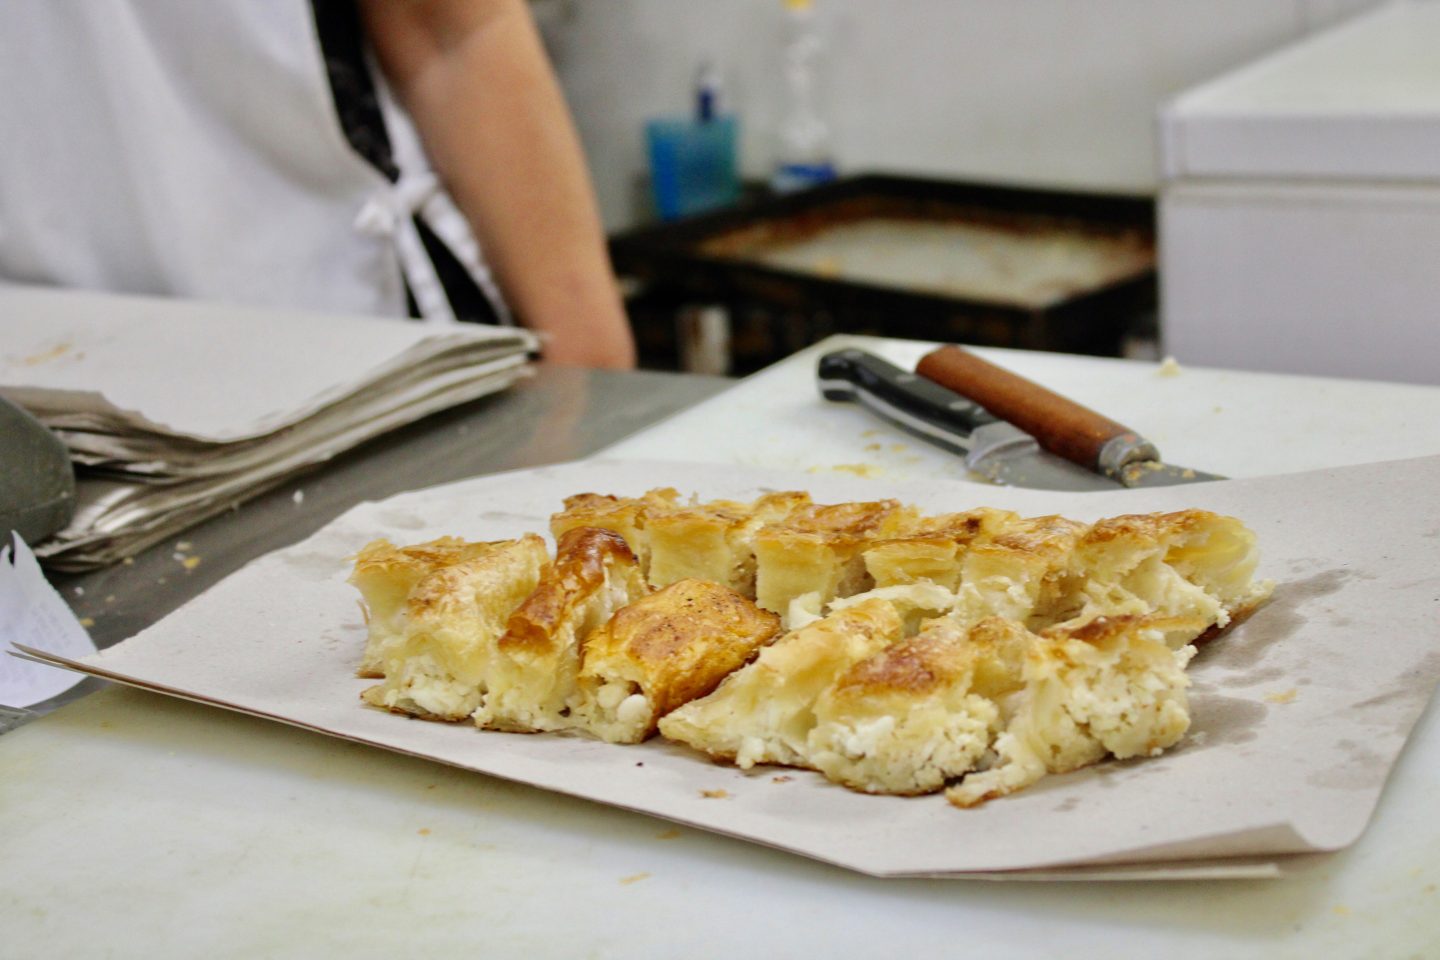 traditional bulgarian food in sofia: banitsa on white paper inside a bakery